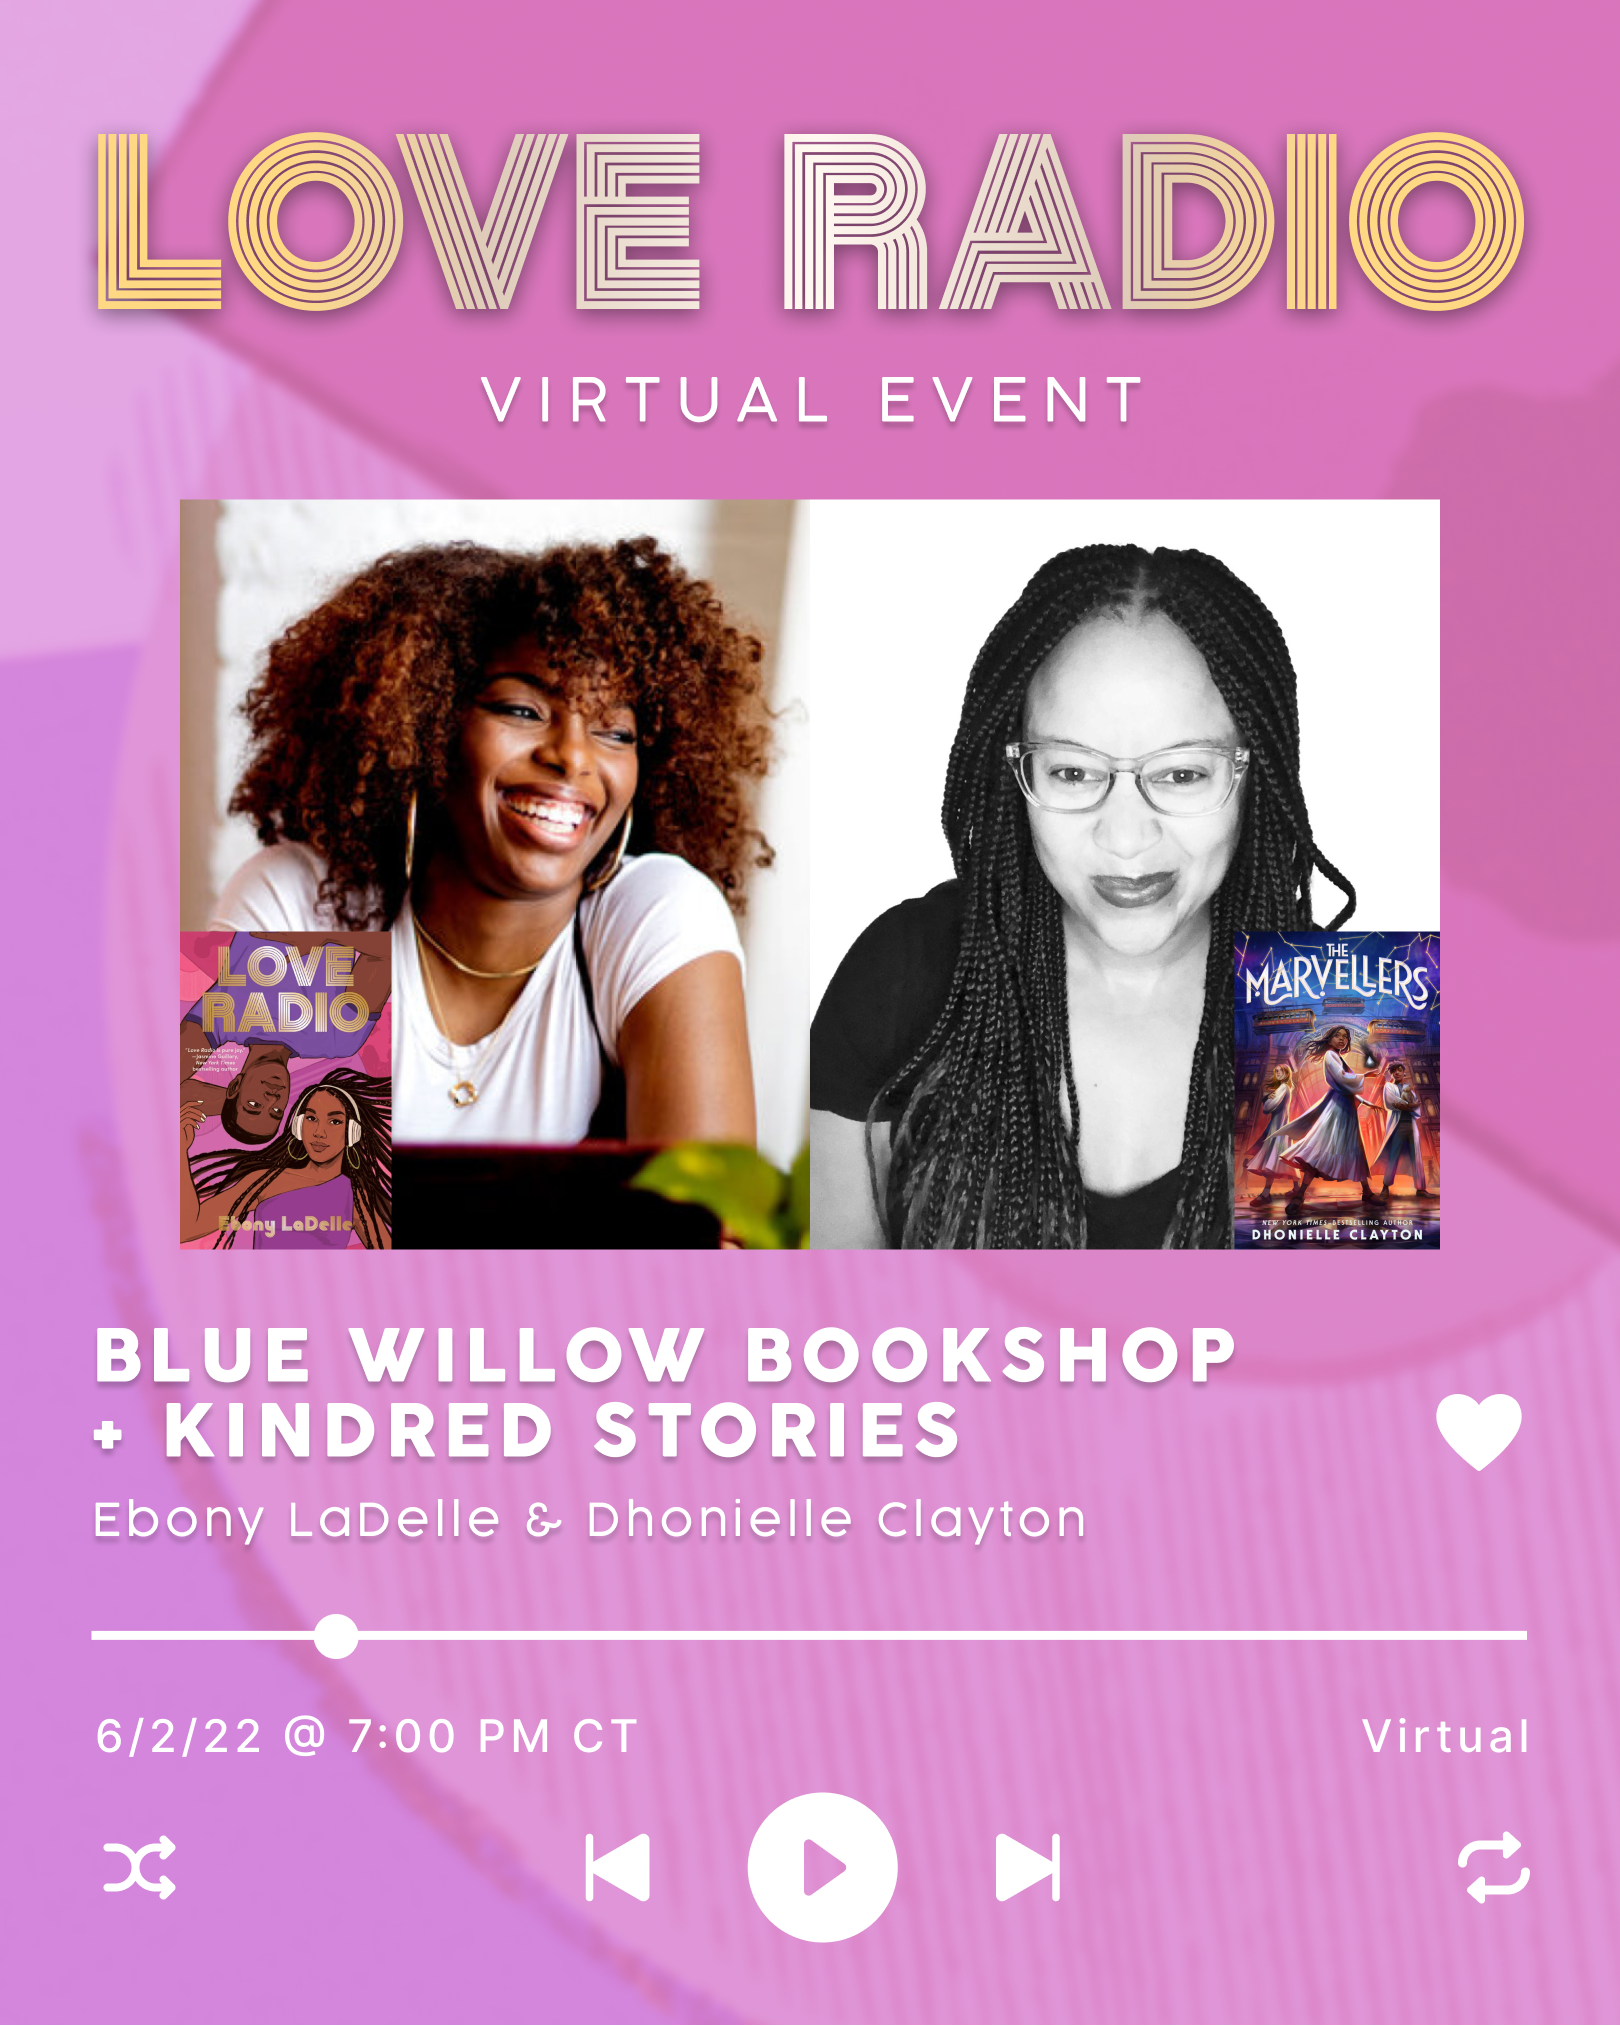 Virtual Author Talk: Love Radio with Ebony Ladelle & Dhonielle Clayton- June 2 @7 PM CST